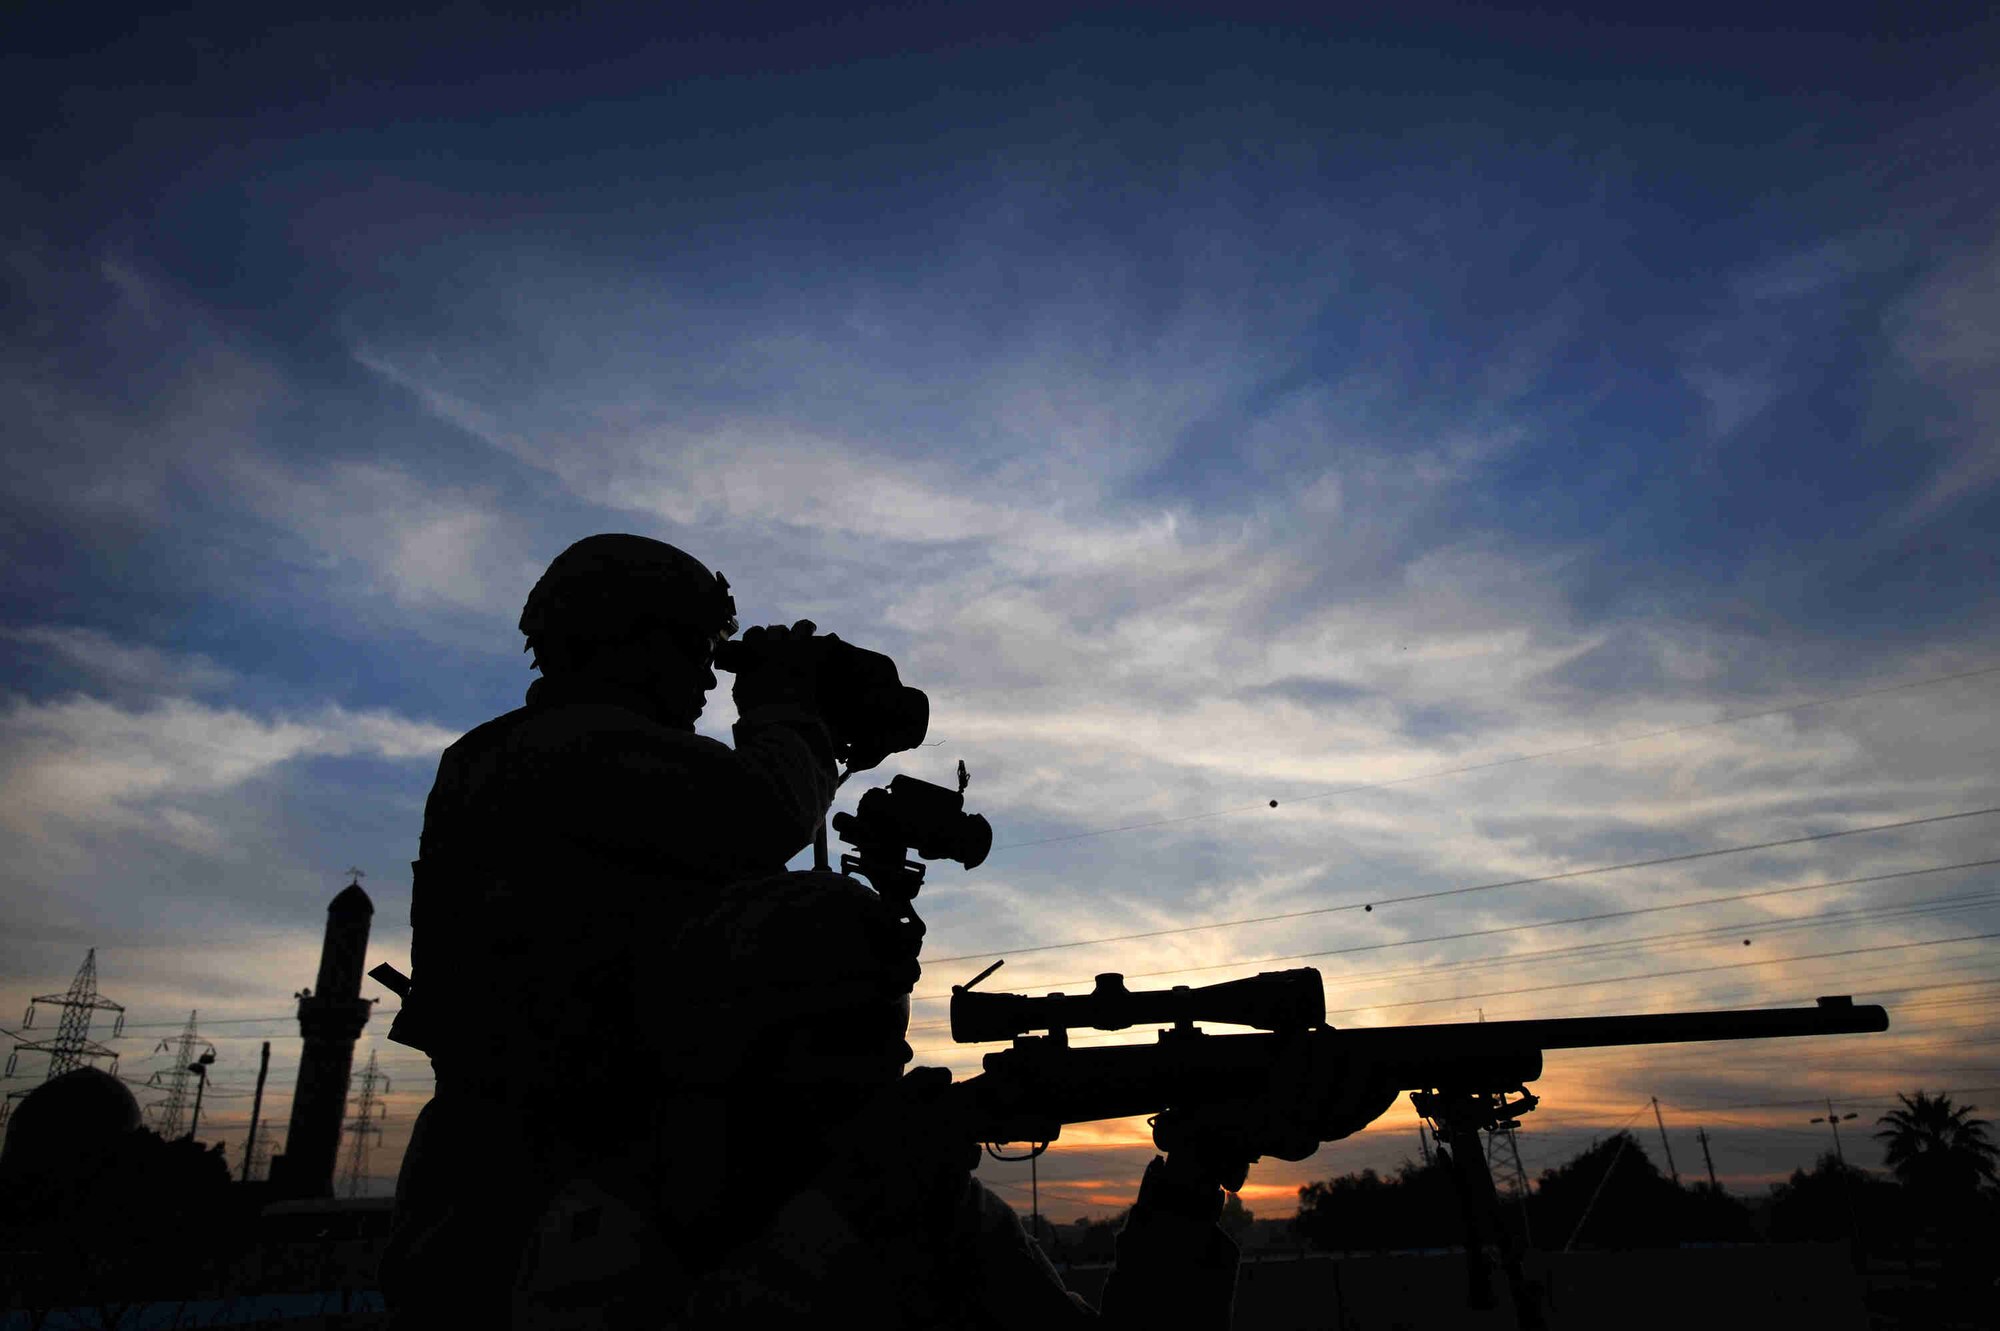 Airmen sharpshooters assigned to the Close Precision Engagement Team scan the horizon for possible threats Dec. 07, 2008 in the Doura community of southern Baghdad, Iraq. The Airmen are attached 732nd Expeditionary Security Forces Squadron, 716th Military Police Battalion. (U.S. Navy Photo by Petty Officer 2nd Class Todd Frantom)